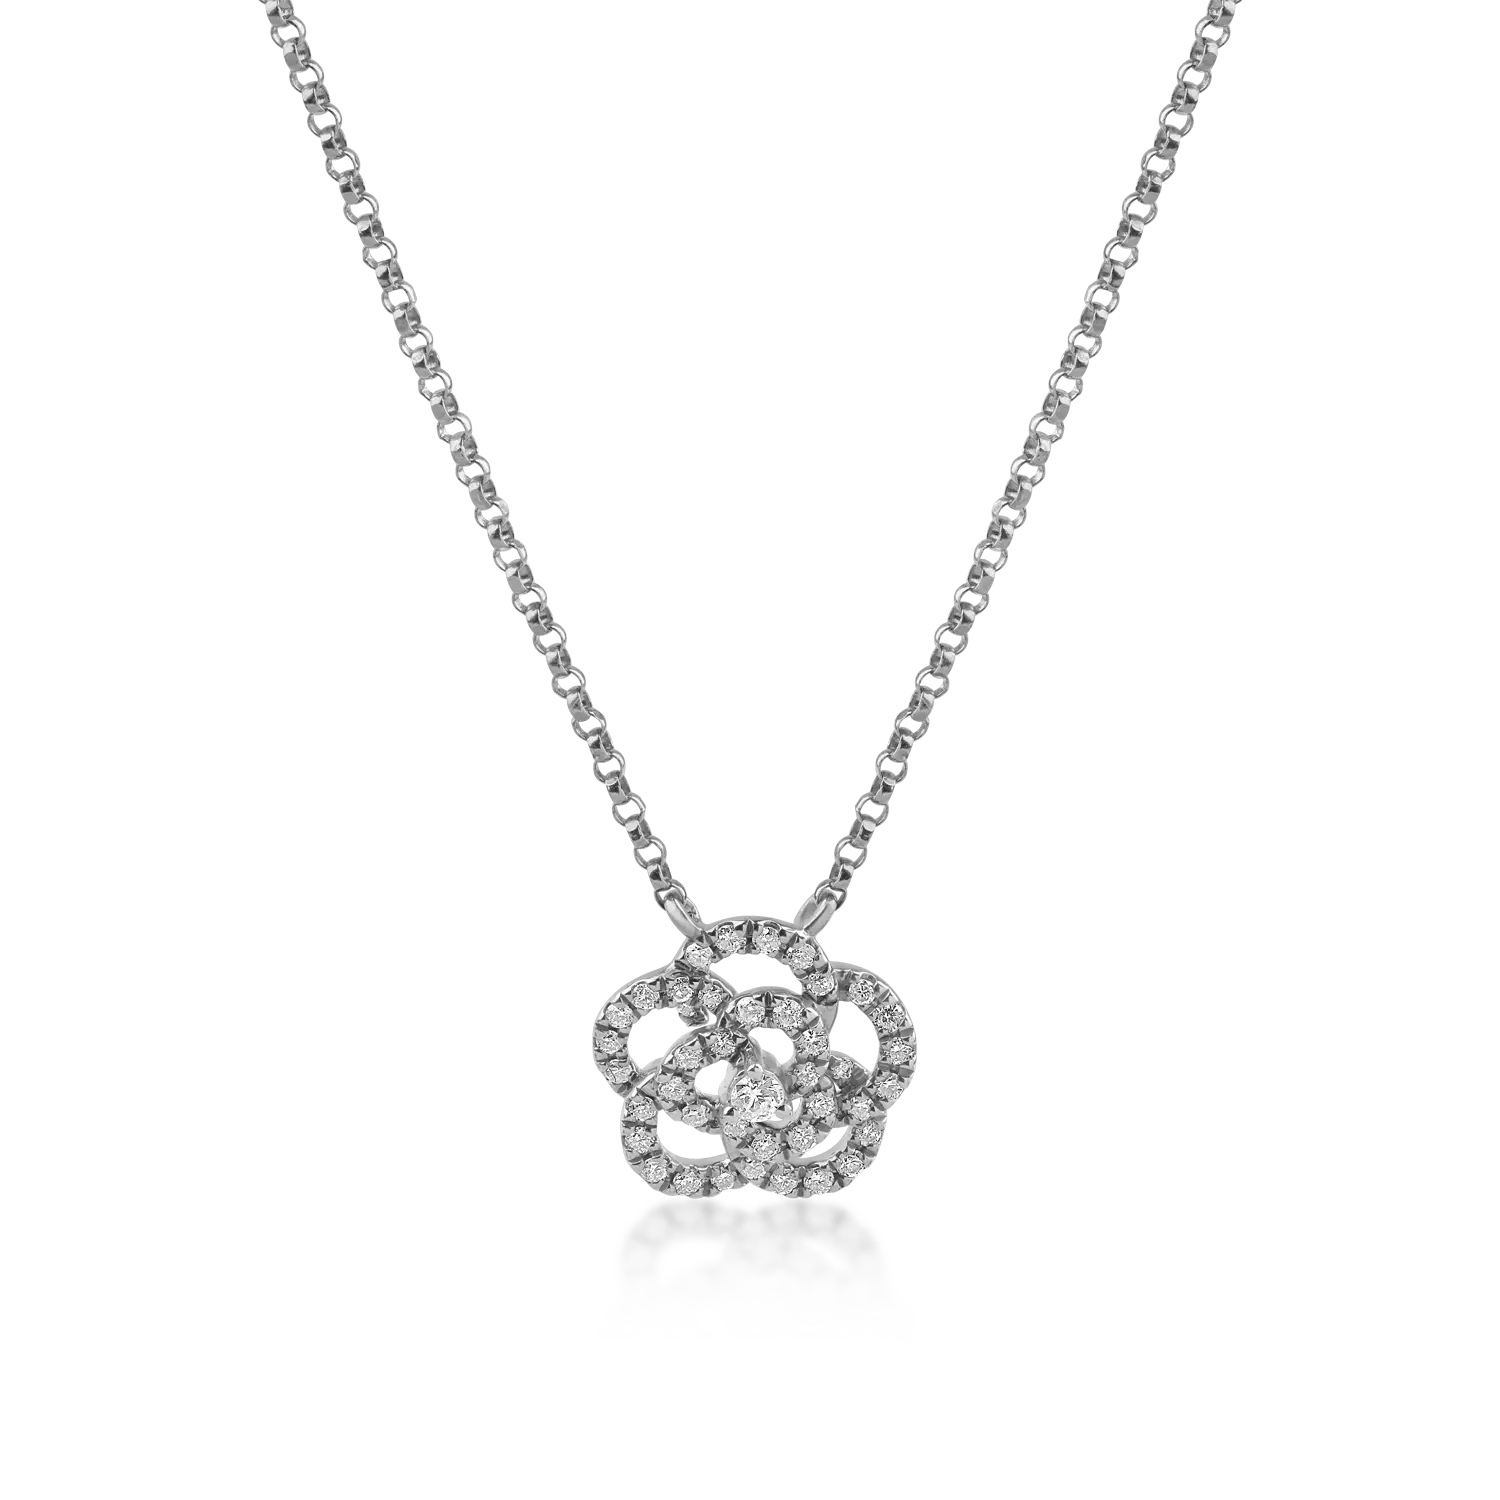 White gold flower pendant necklace with 0.19ct diamonds